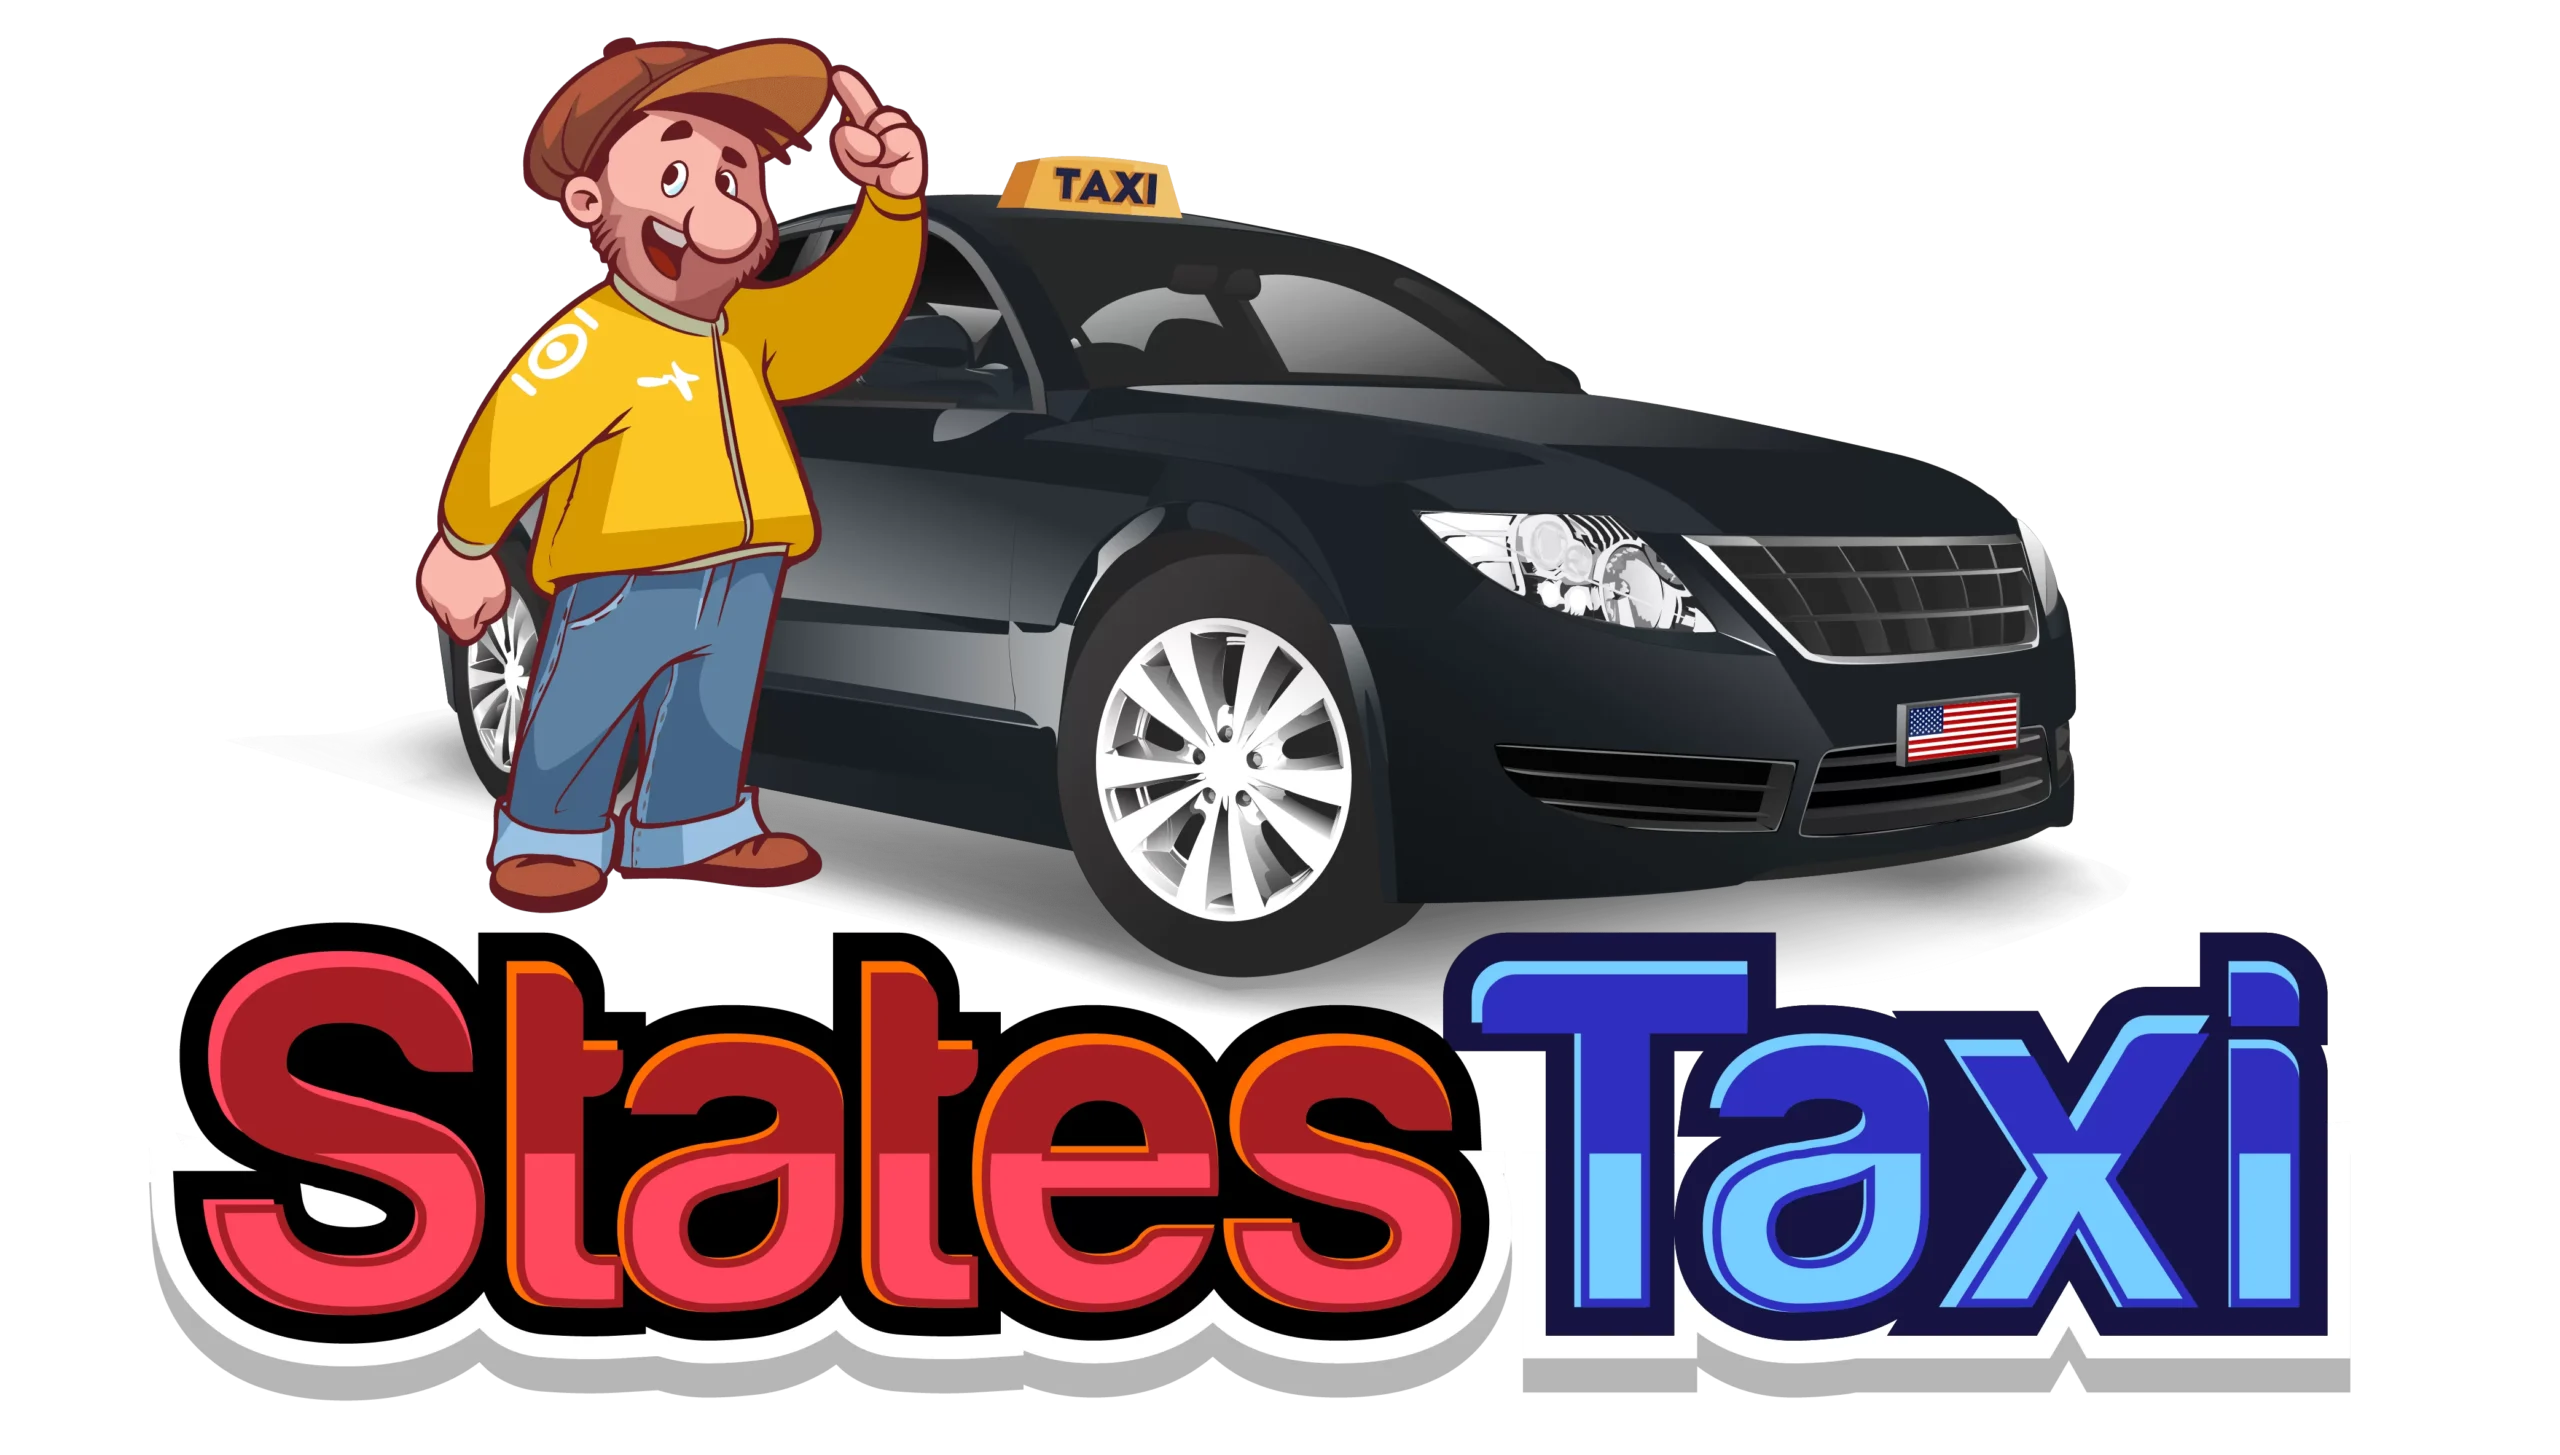 Taxi Near Me: Finding Reliable Taxi Services in Your Area